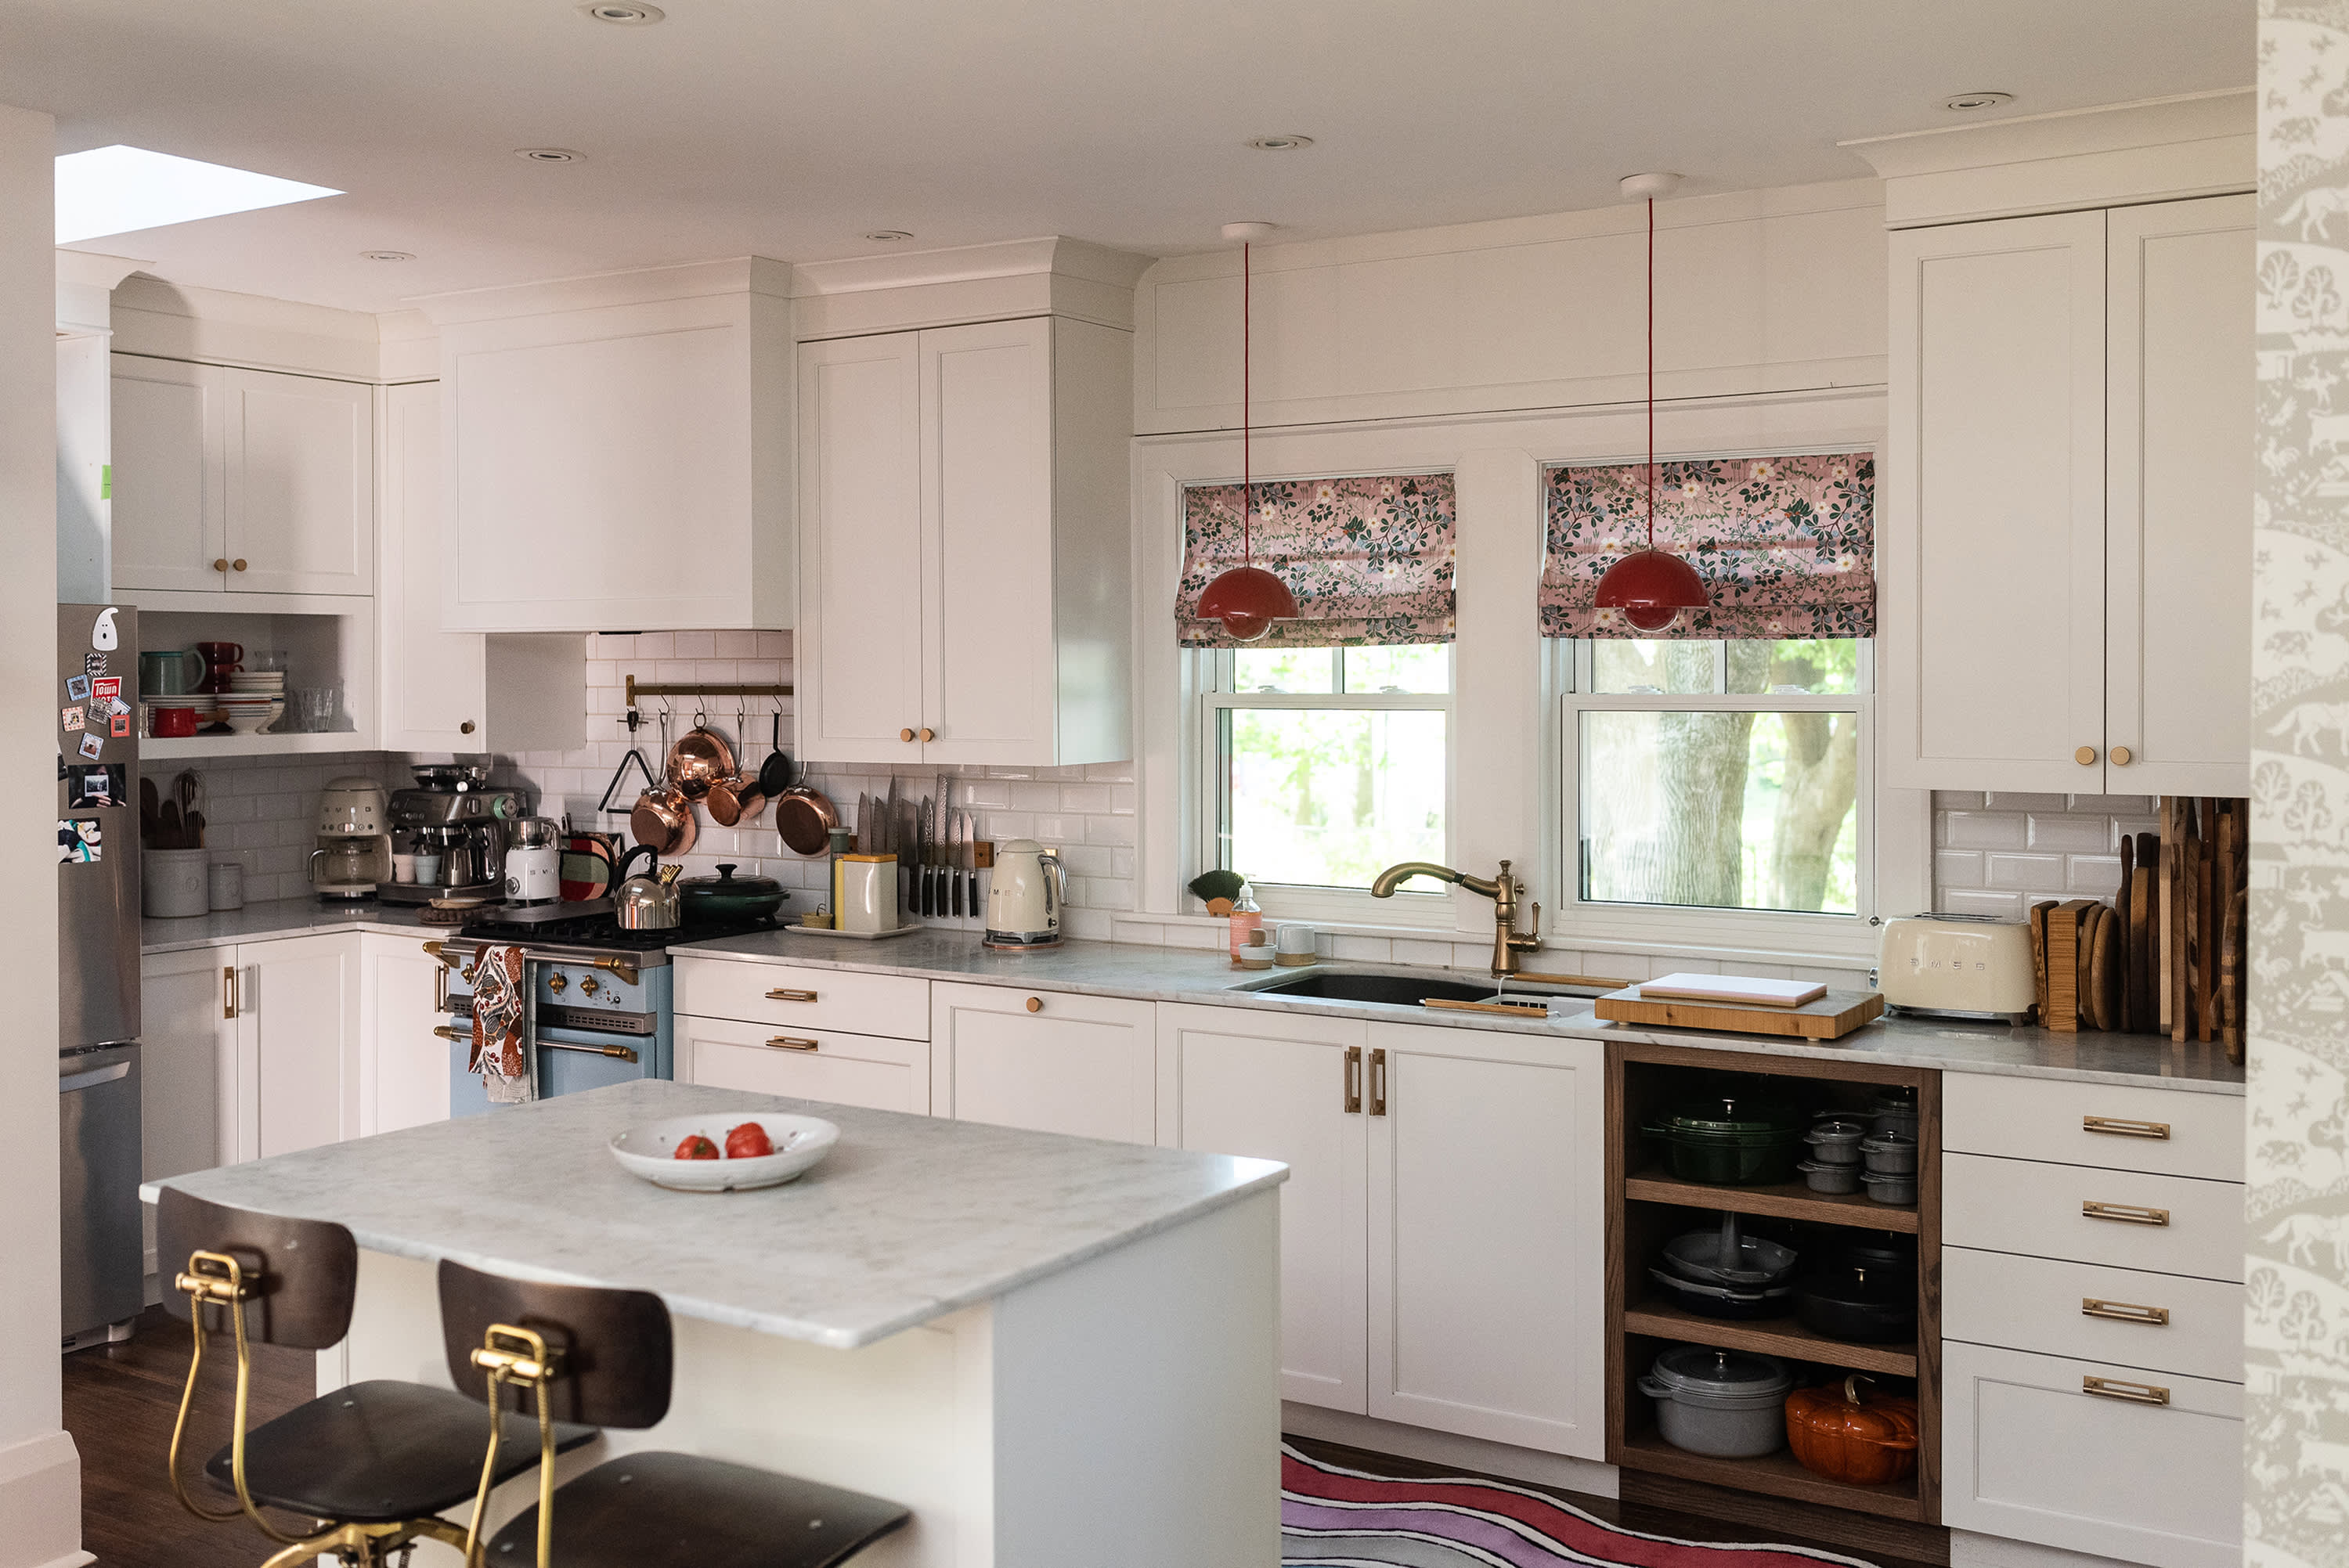 24 Sizzling Kitchen Trends 2022 You Don't Want to Miss - Decorilla